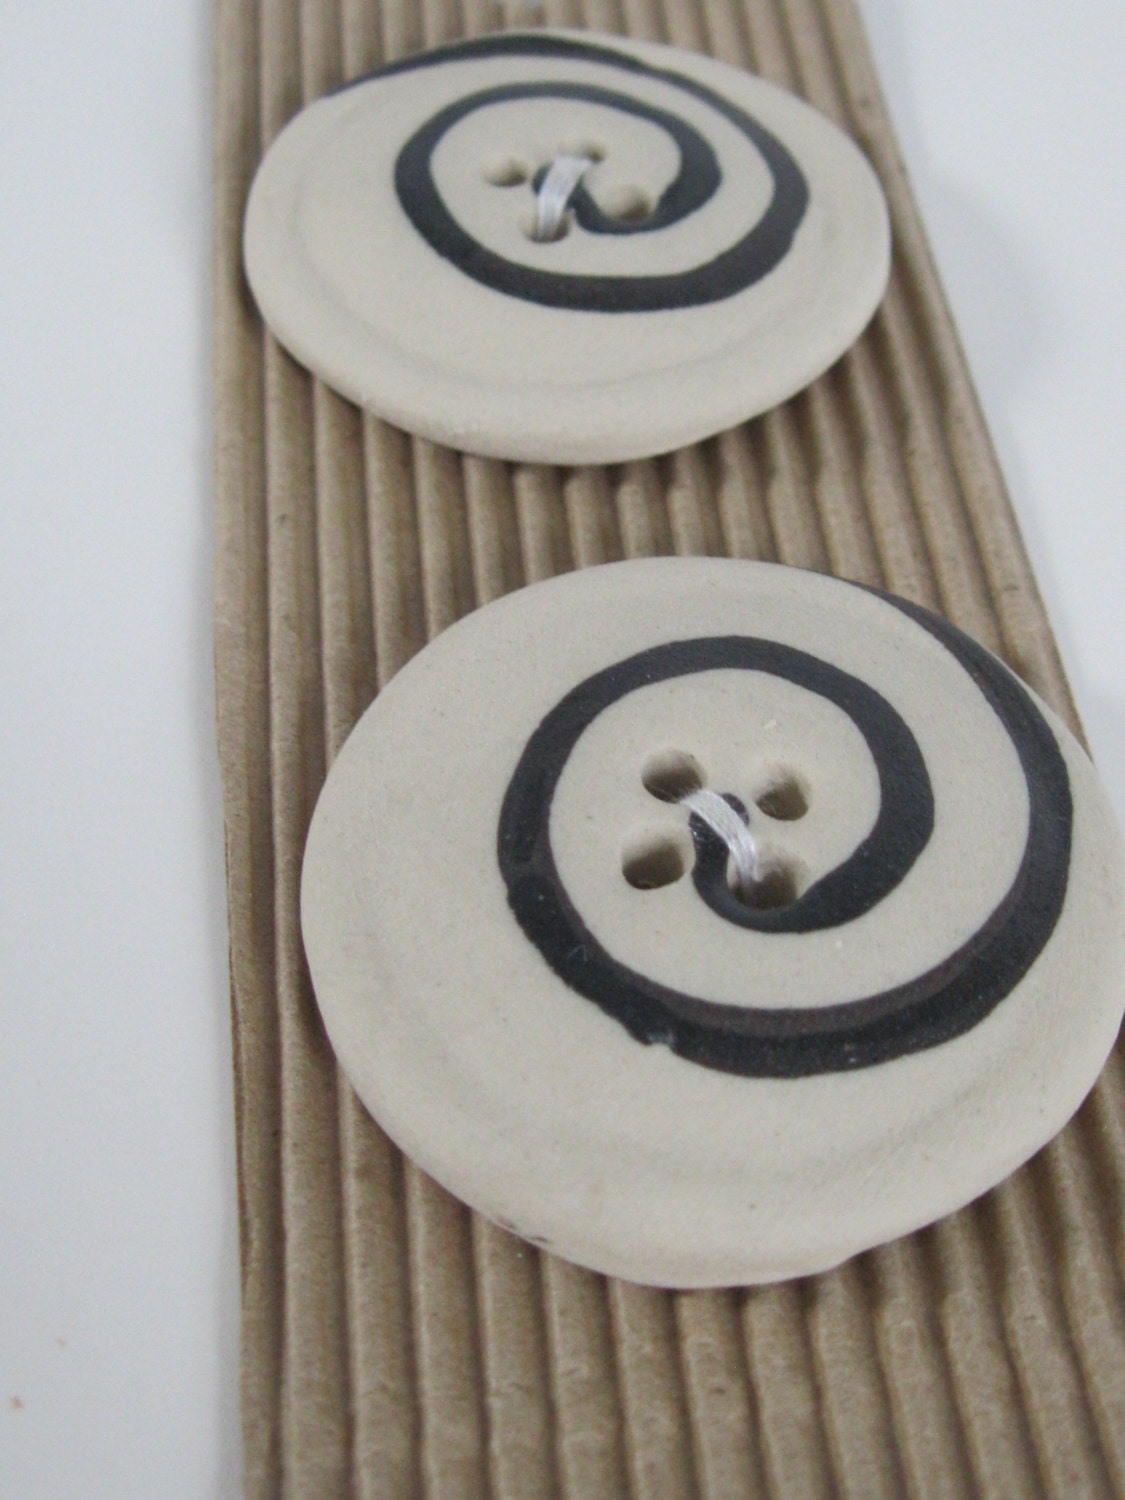 Hand Made Buttons from Africa - Black and Cream - 2 Buttons - FabricFascination